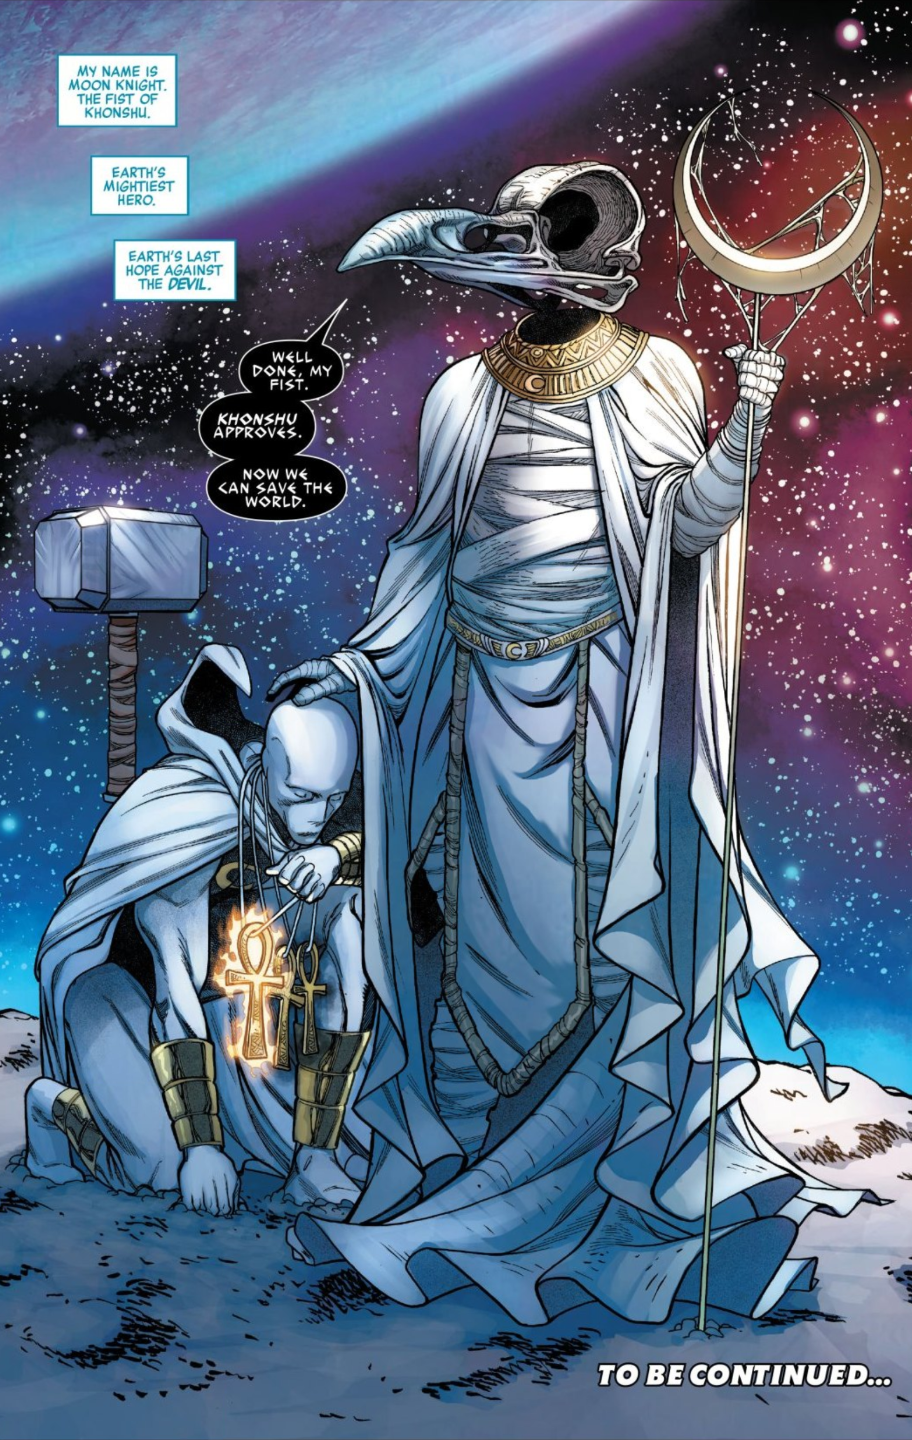 How Moon Knight Can Take Down the Avengers. Moon knight comics, Moon knight, Marvel art